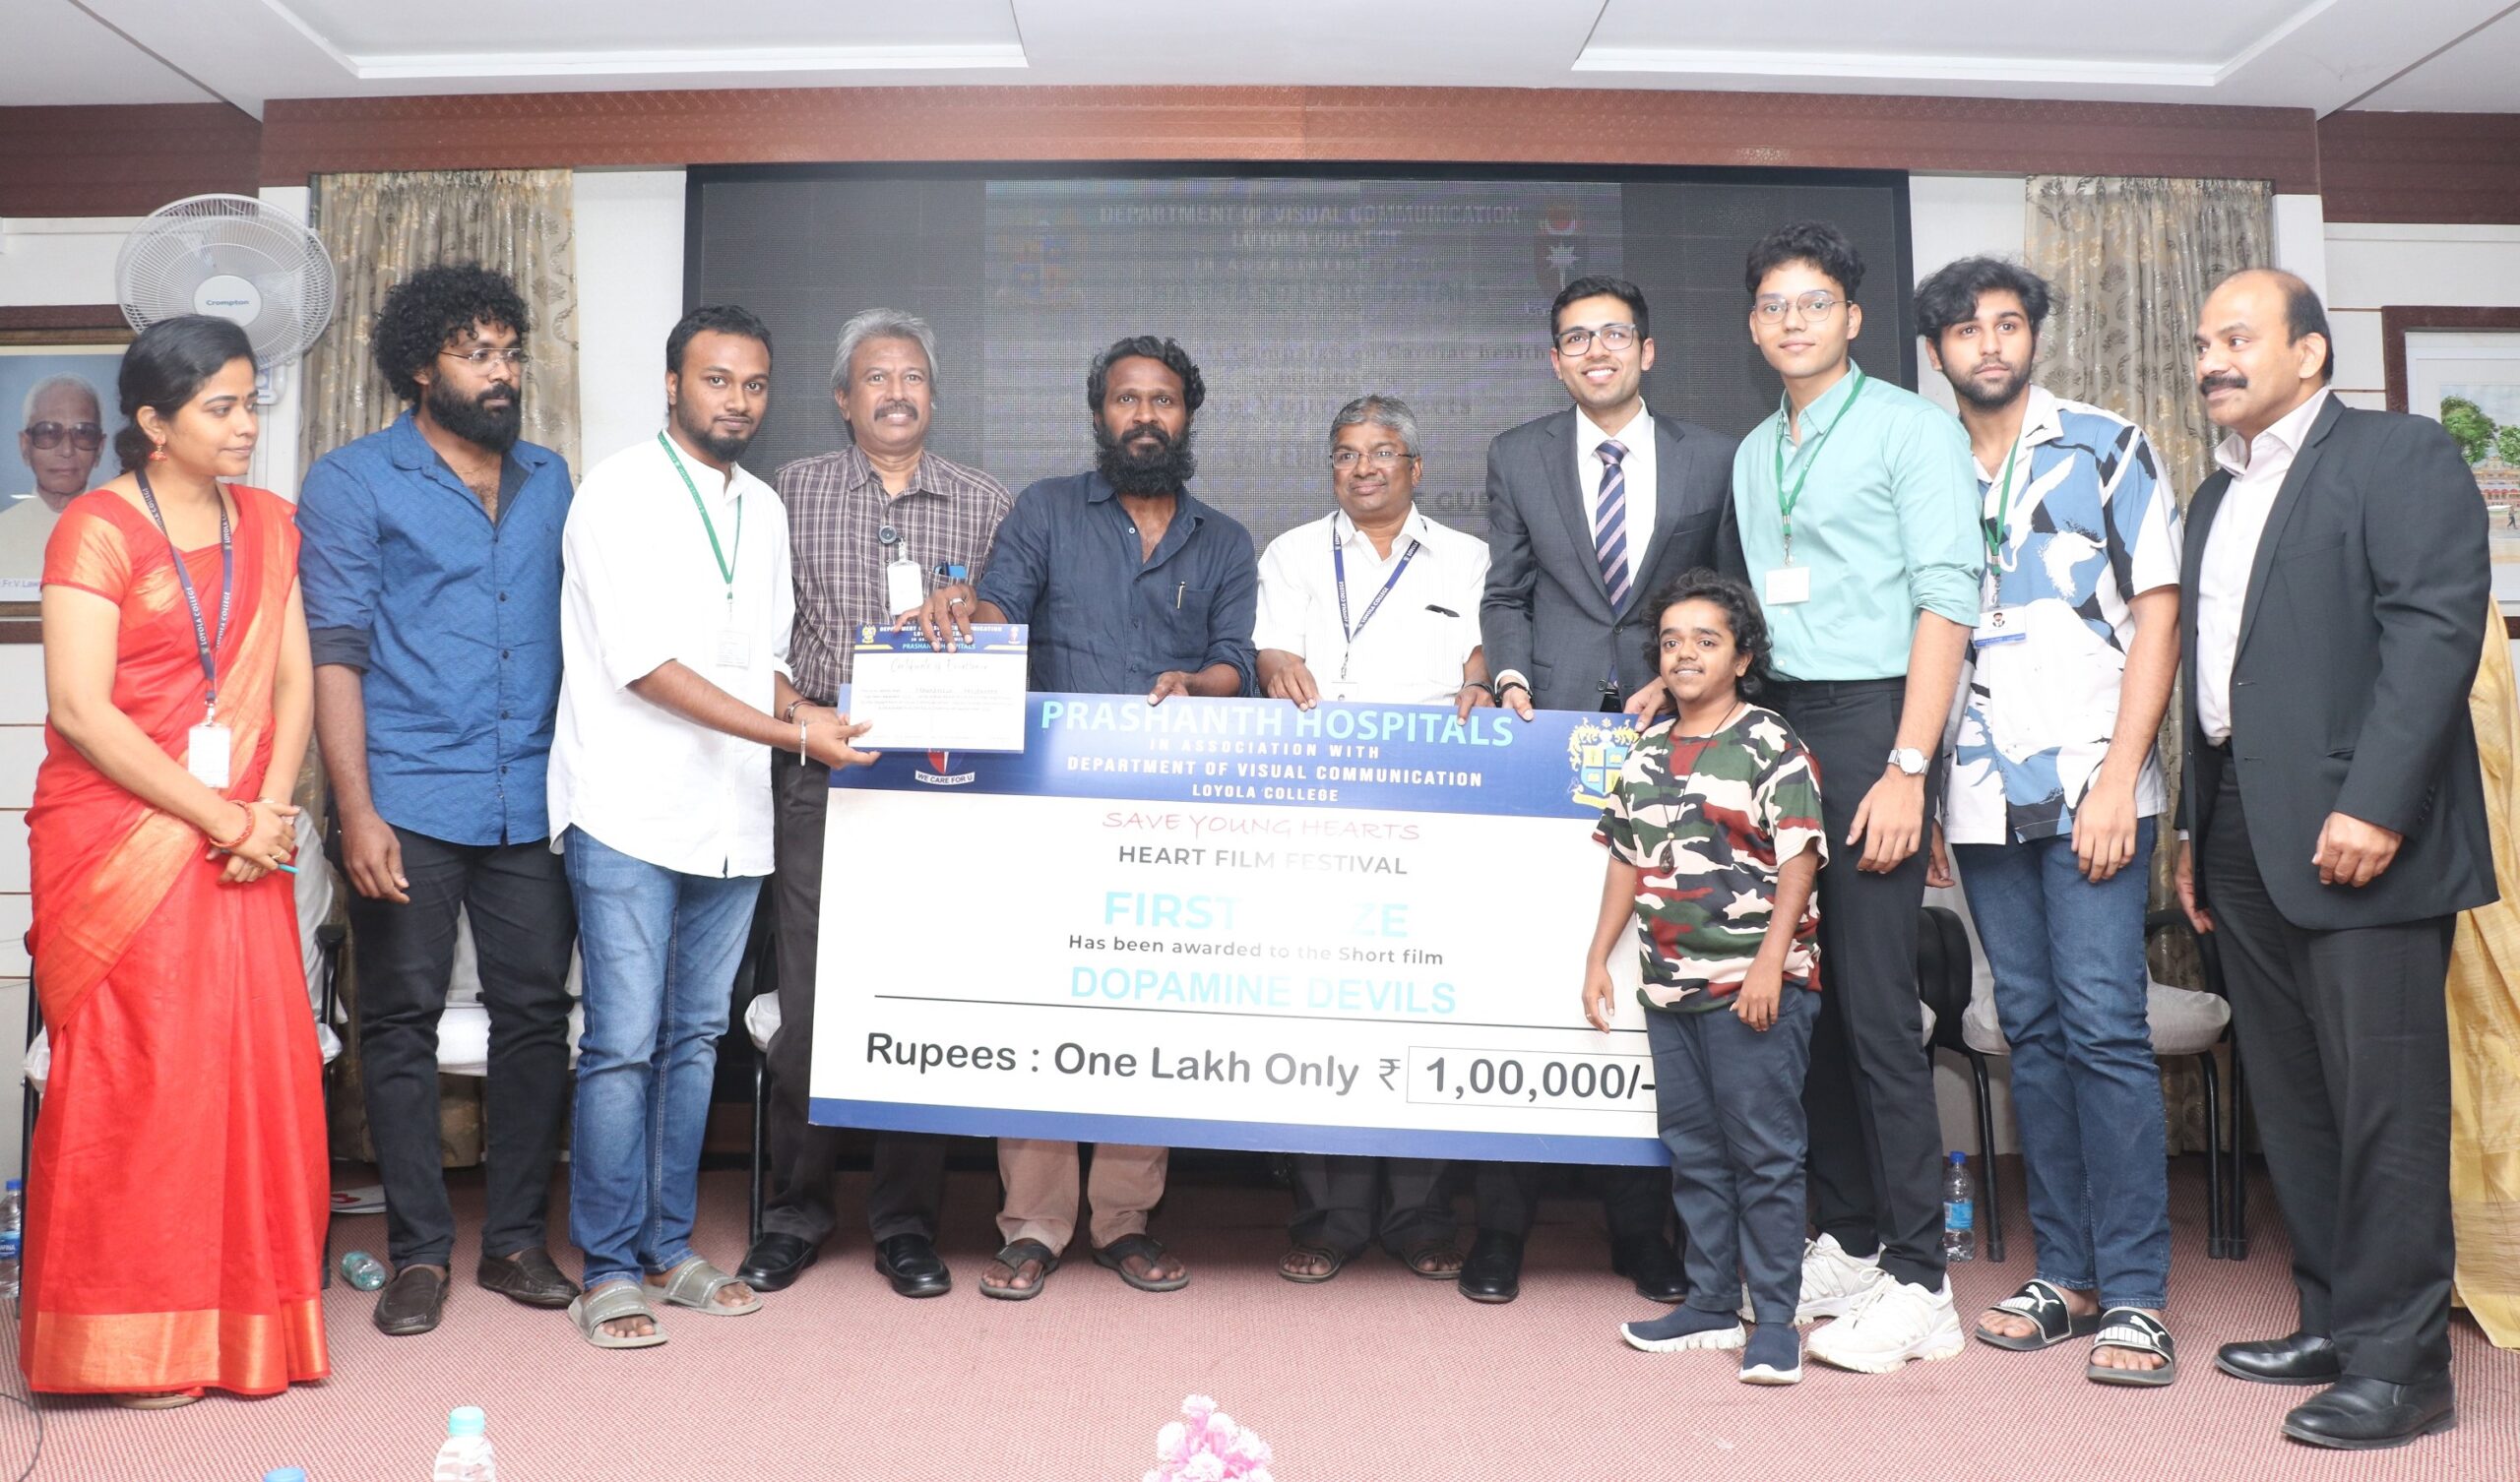 Student Filmmakers Win Award For Short Films on Increasing Awareness About Heart Disorders Among Young Indians